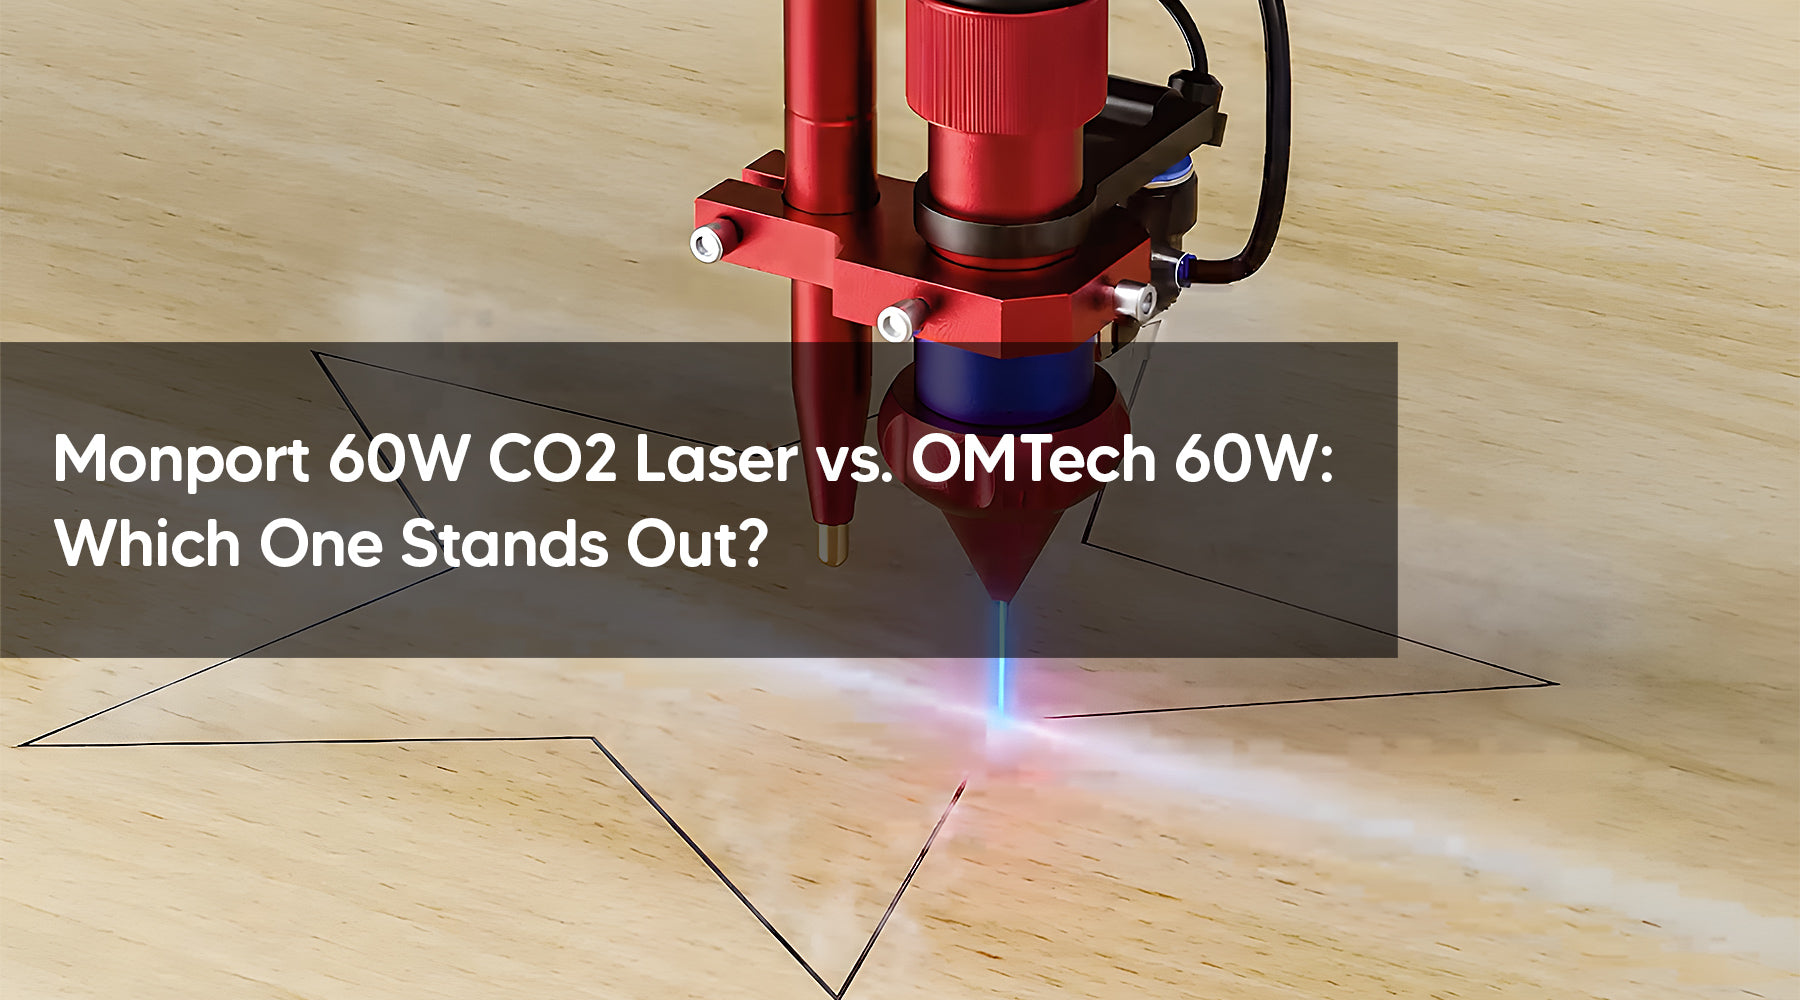 Monport 60W CO2 Laser vs. OMTech 60W: Which One Stands Out?